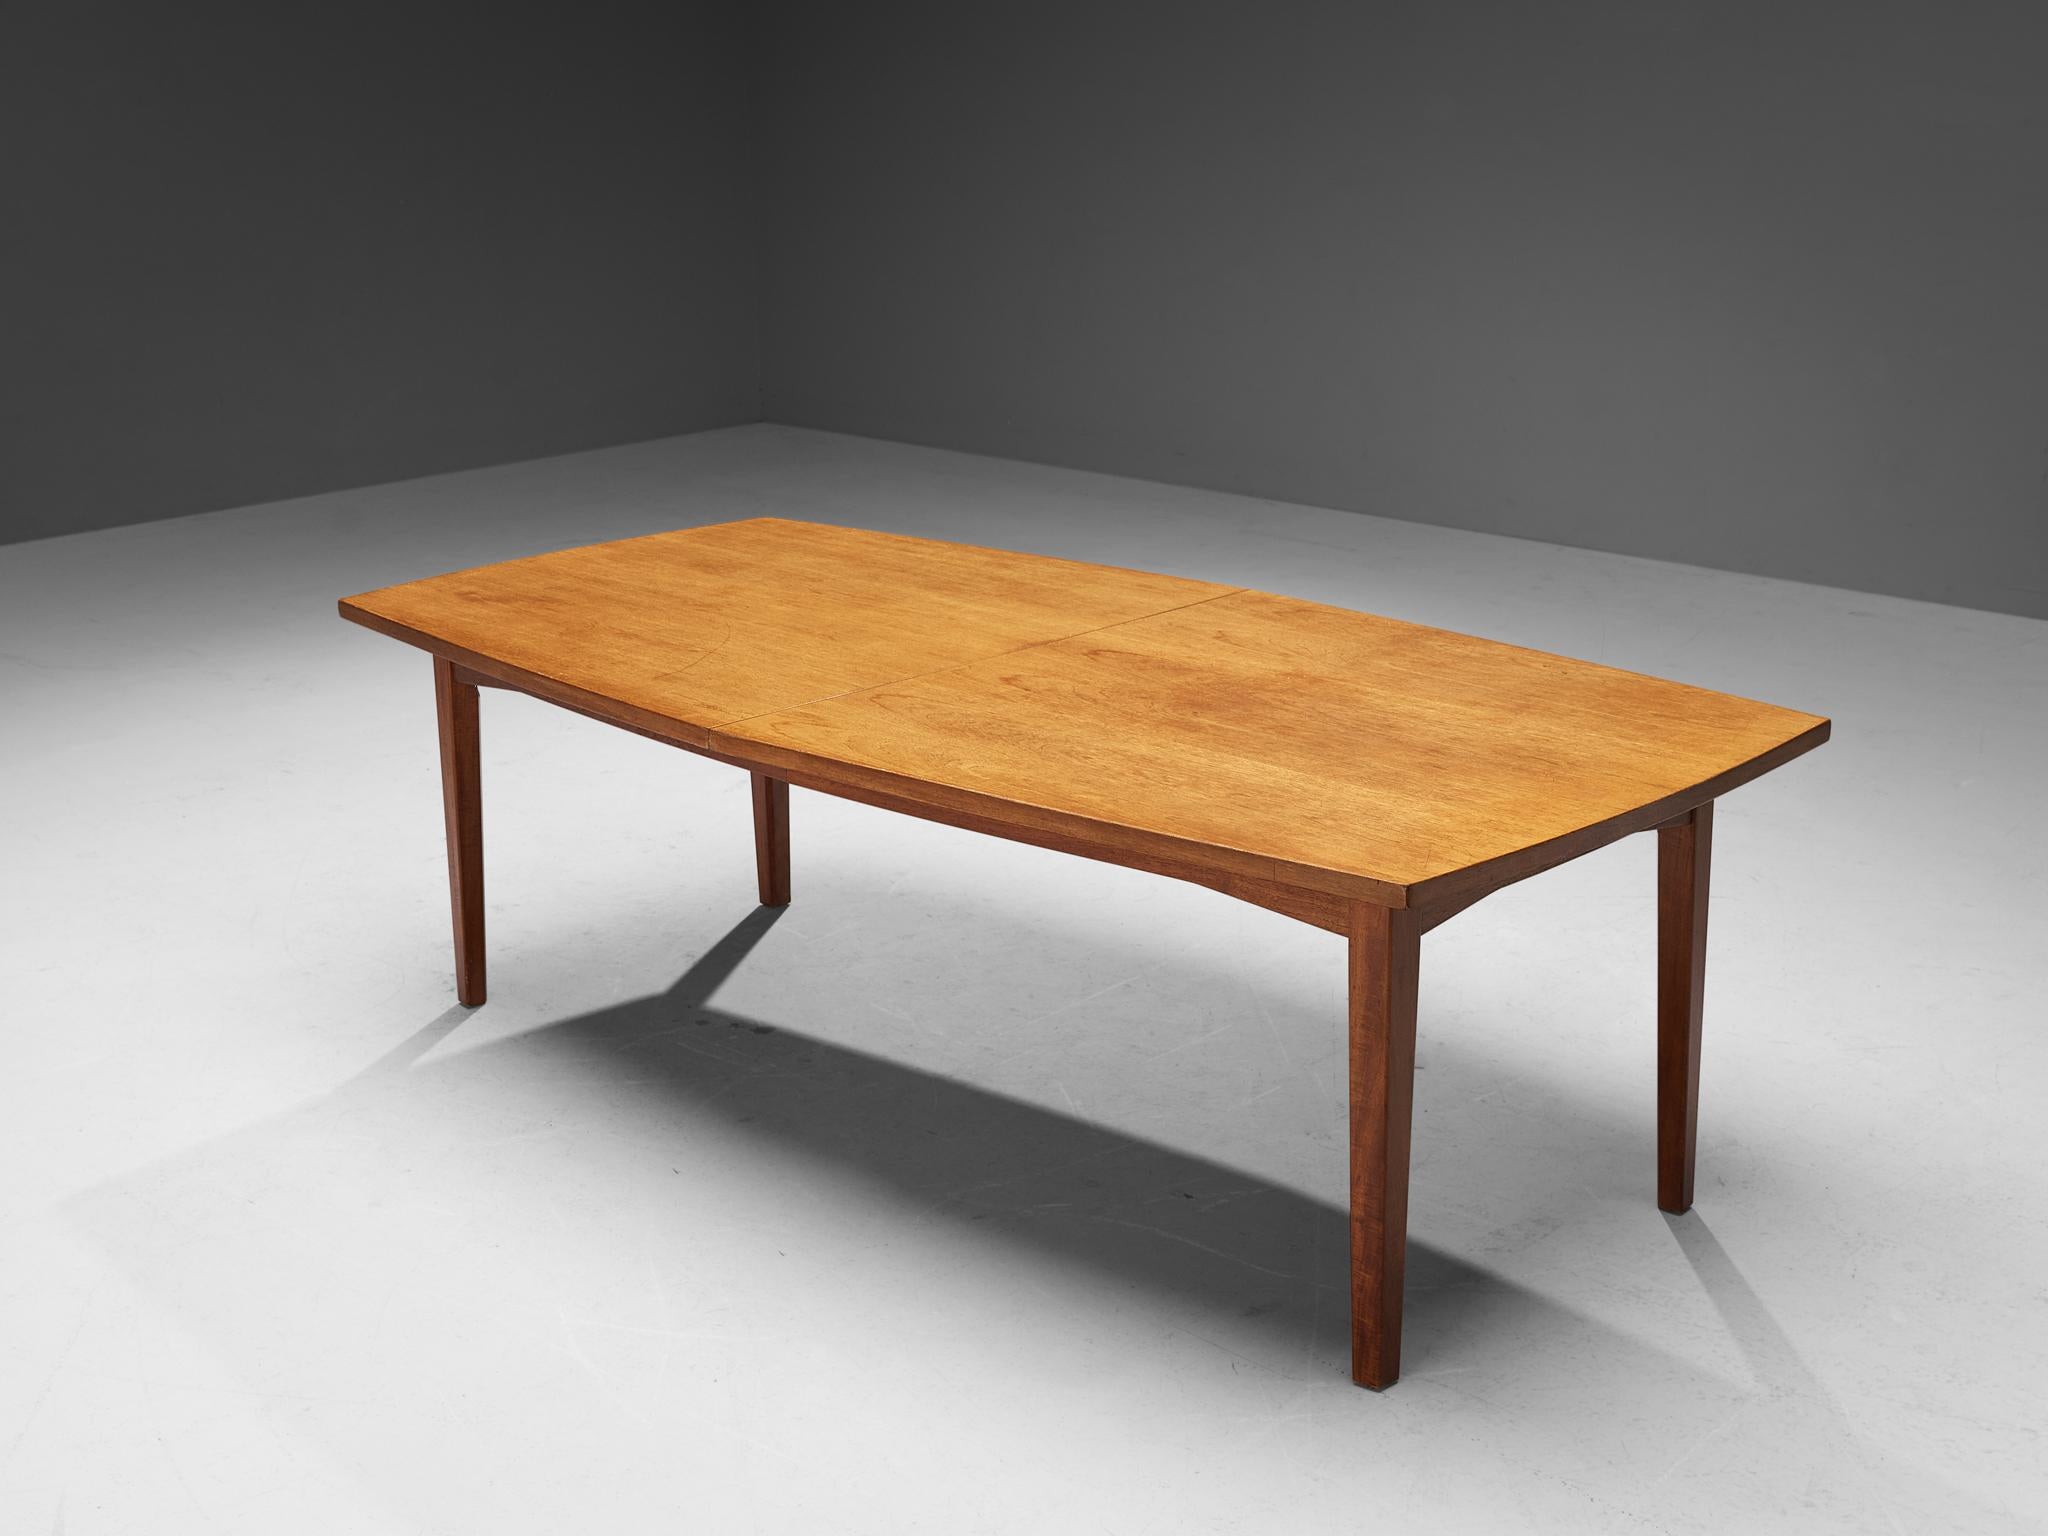 Conference or dining table, oak, Scandinavia, 1960s

This conference table consists of a subtle boat shaped top supported by four elegant legs. This table is made in a subtle and modest way, it has an open look and is structurally supported by means